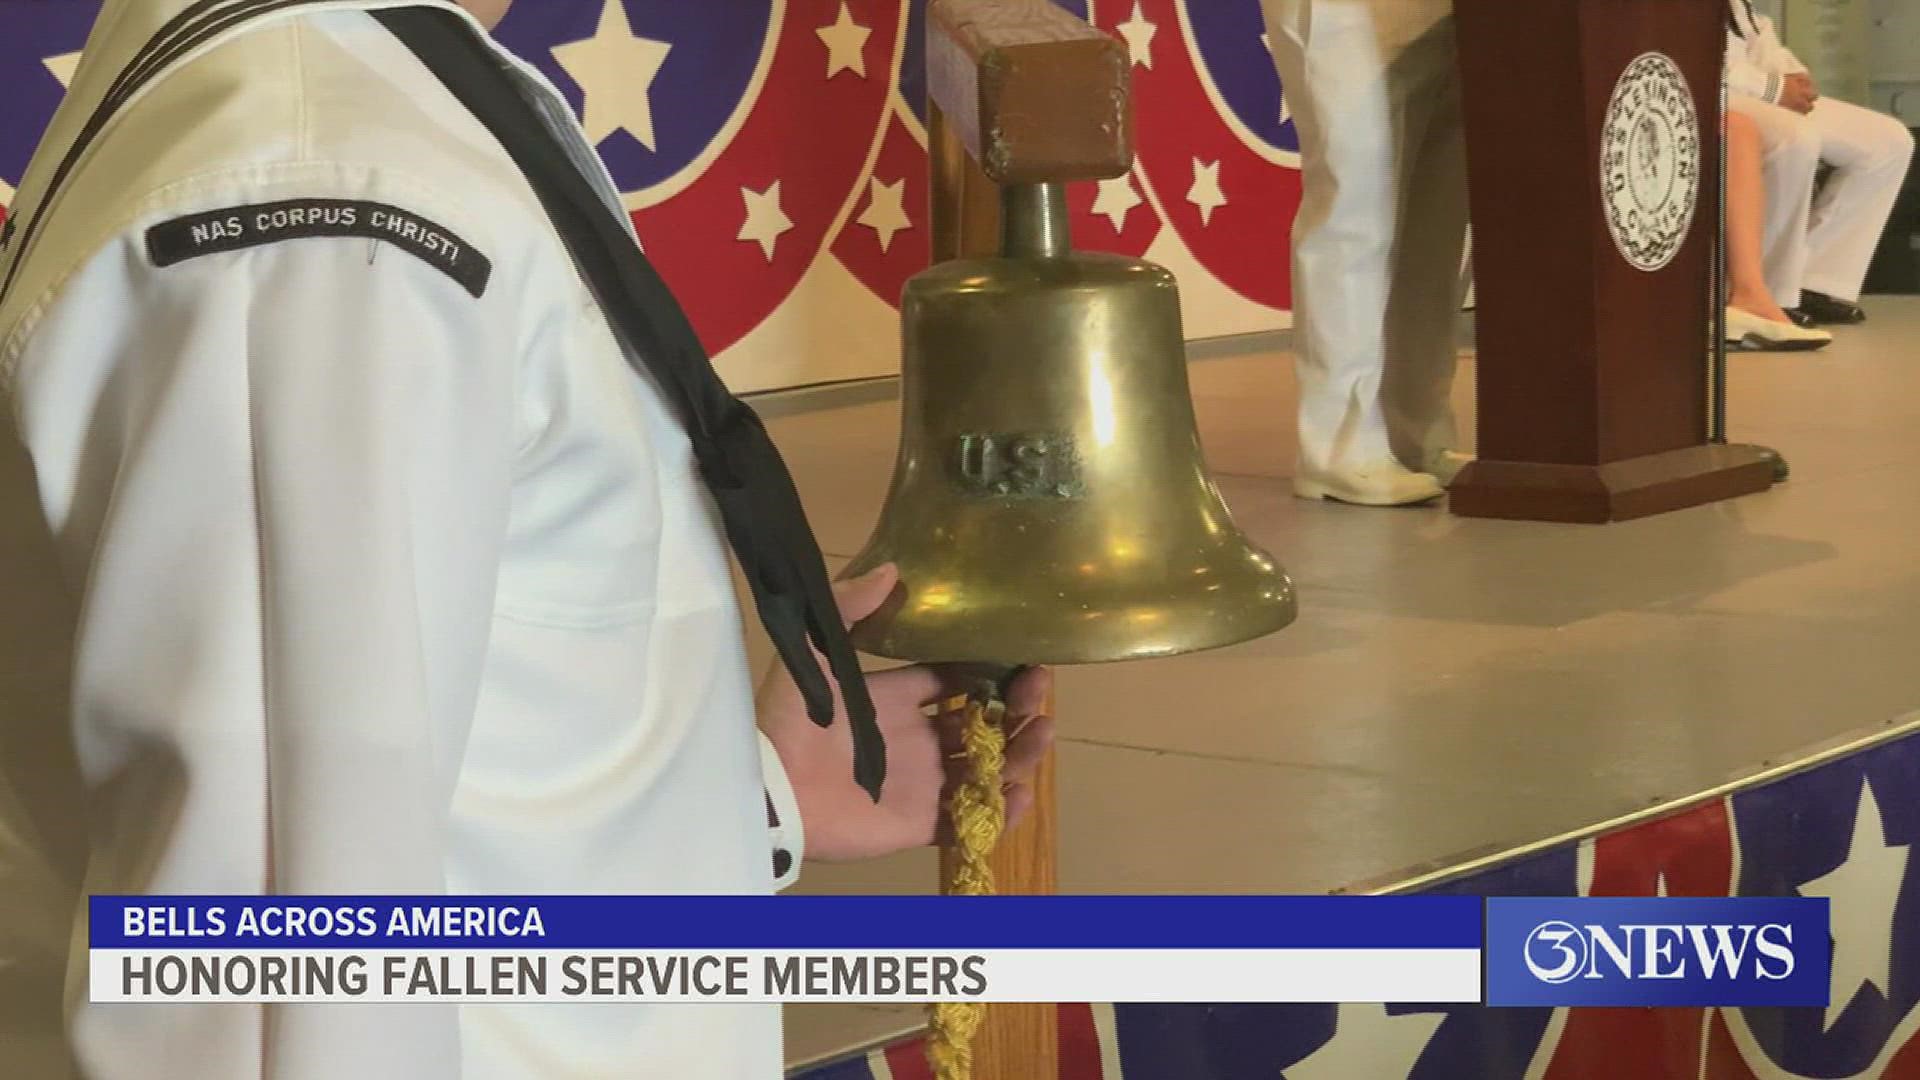 The seventh annual Bells Across America for fallen service members was held this morning aboard the USS Lexington.